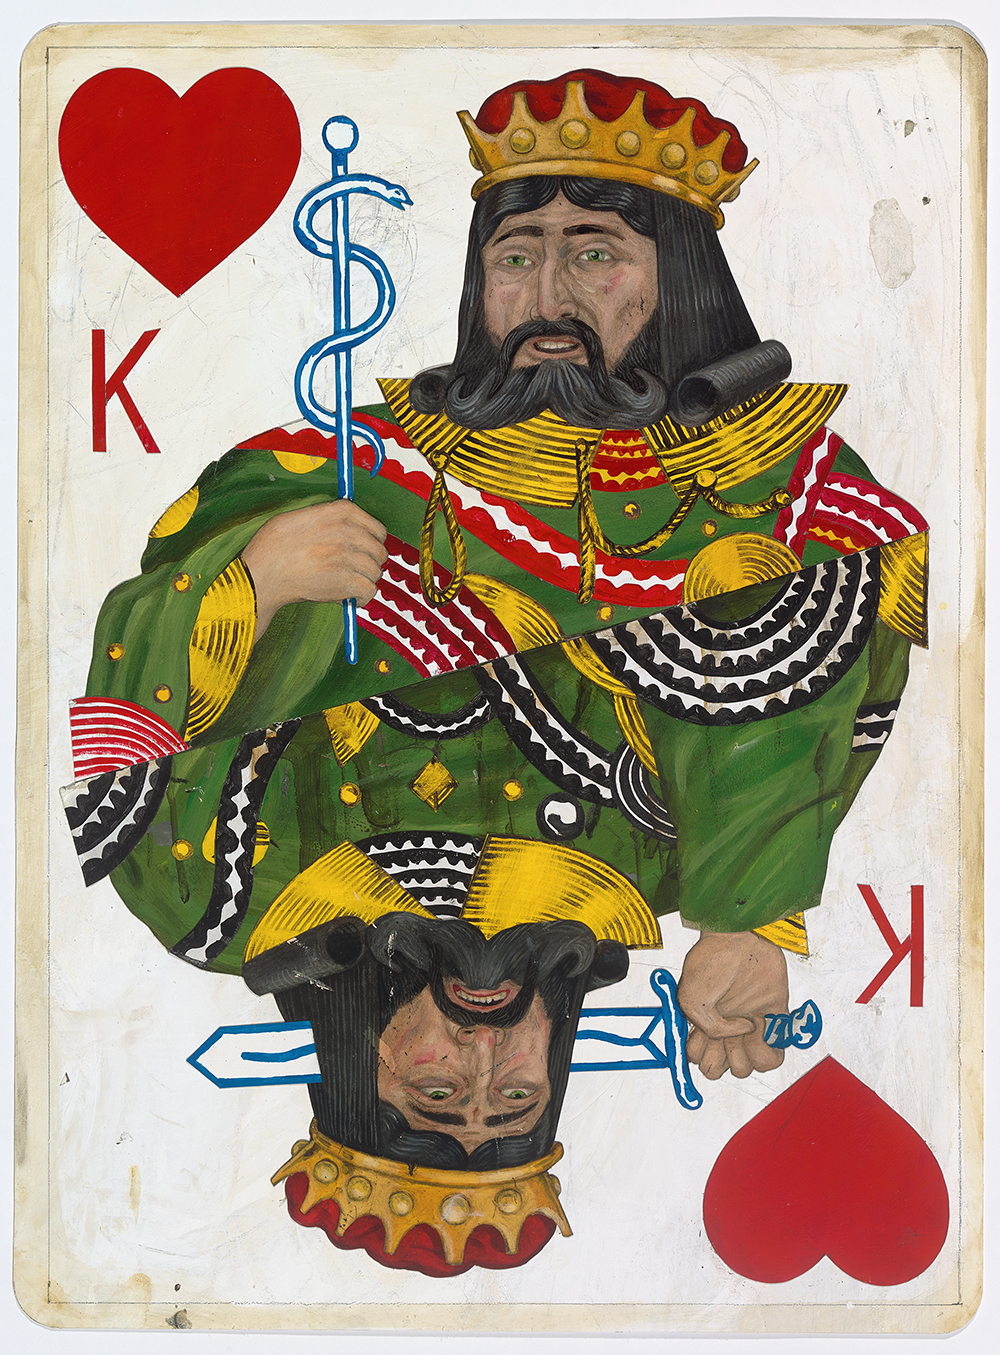 A king of hearts playing card illustration by artist Jason Holley.